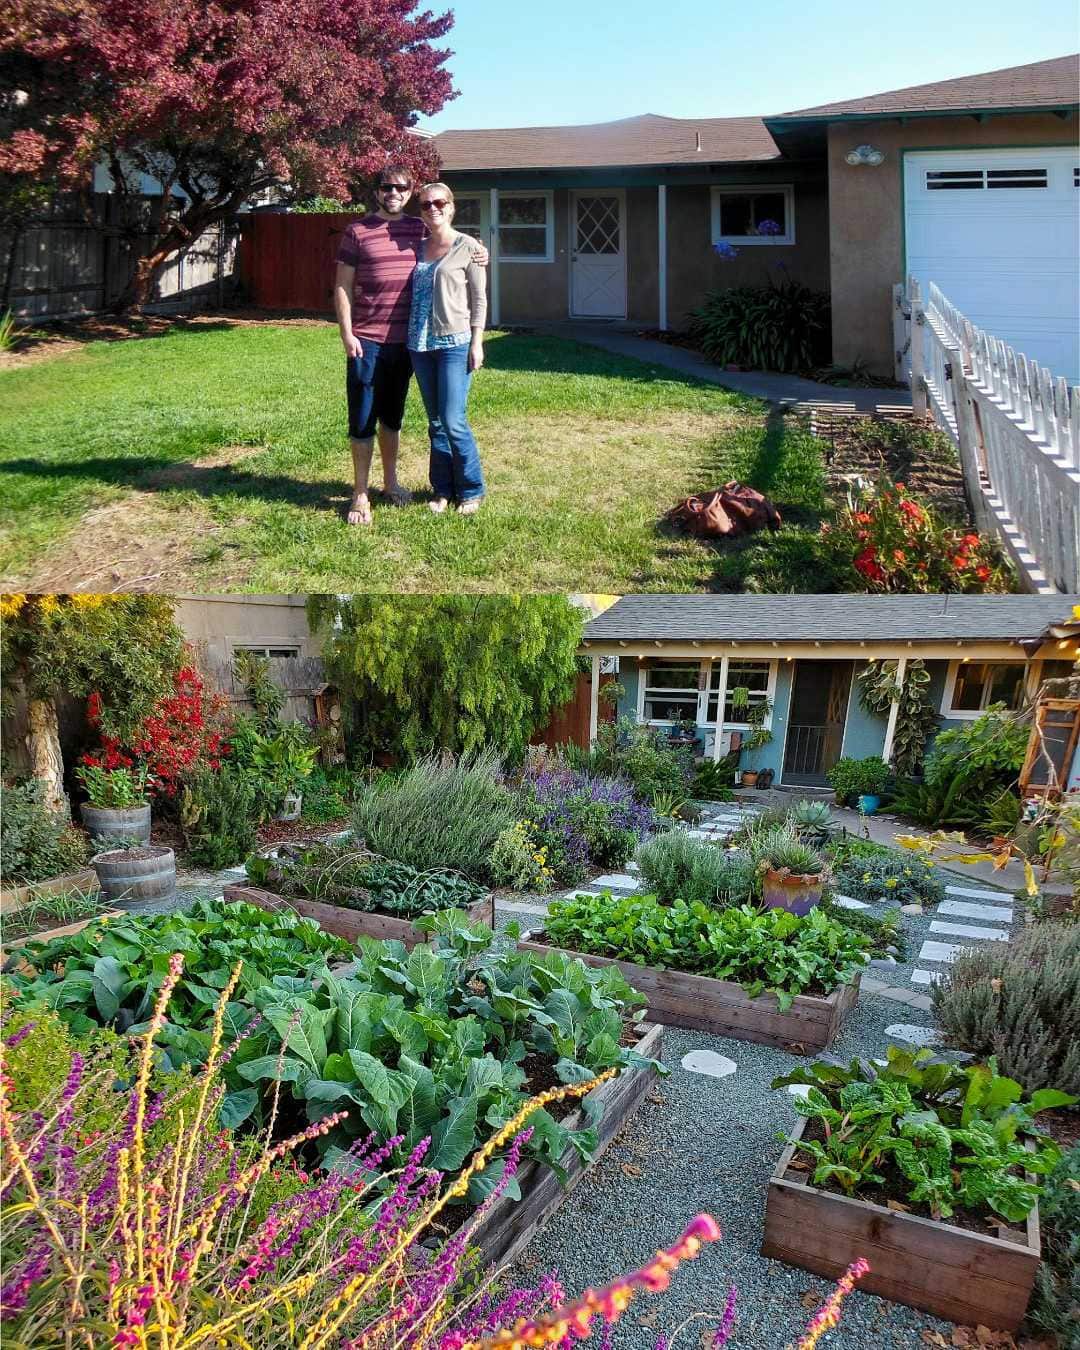 A two part image collage that shows a before and after photograph of the front of the house. The first image shows Aaron and DeannaCat standing in their front yard which is mostly grass. The second image shows a similar angle of the front of the house yet now the yard is full of annual and perennial plants for pollinators, raised garden beds full of vegetables, trees, shrubs, vines, landscaped with gravel and paver walkways. 